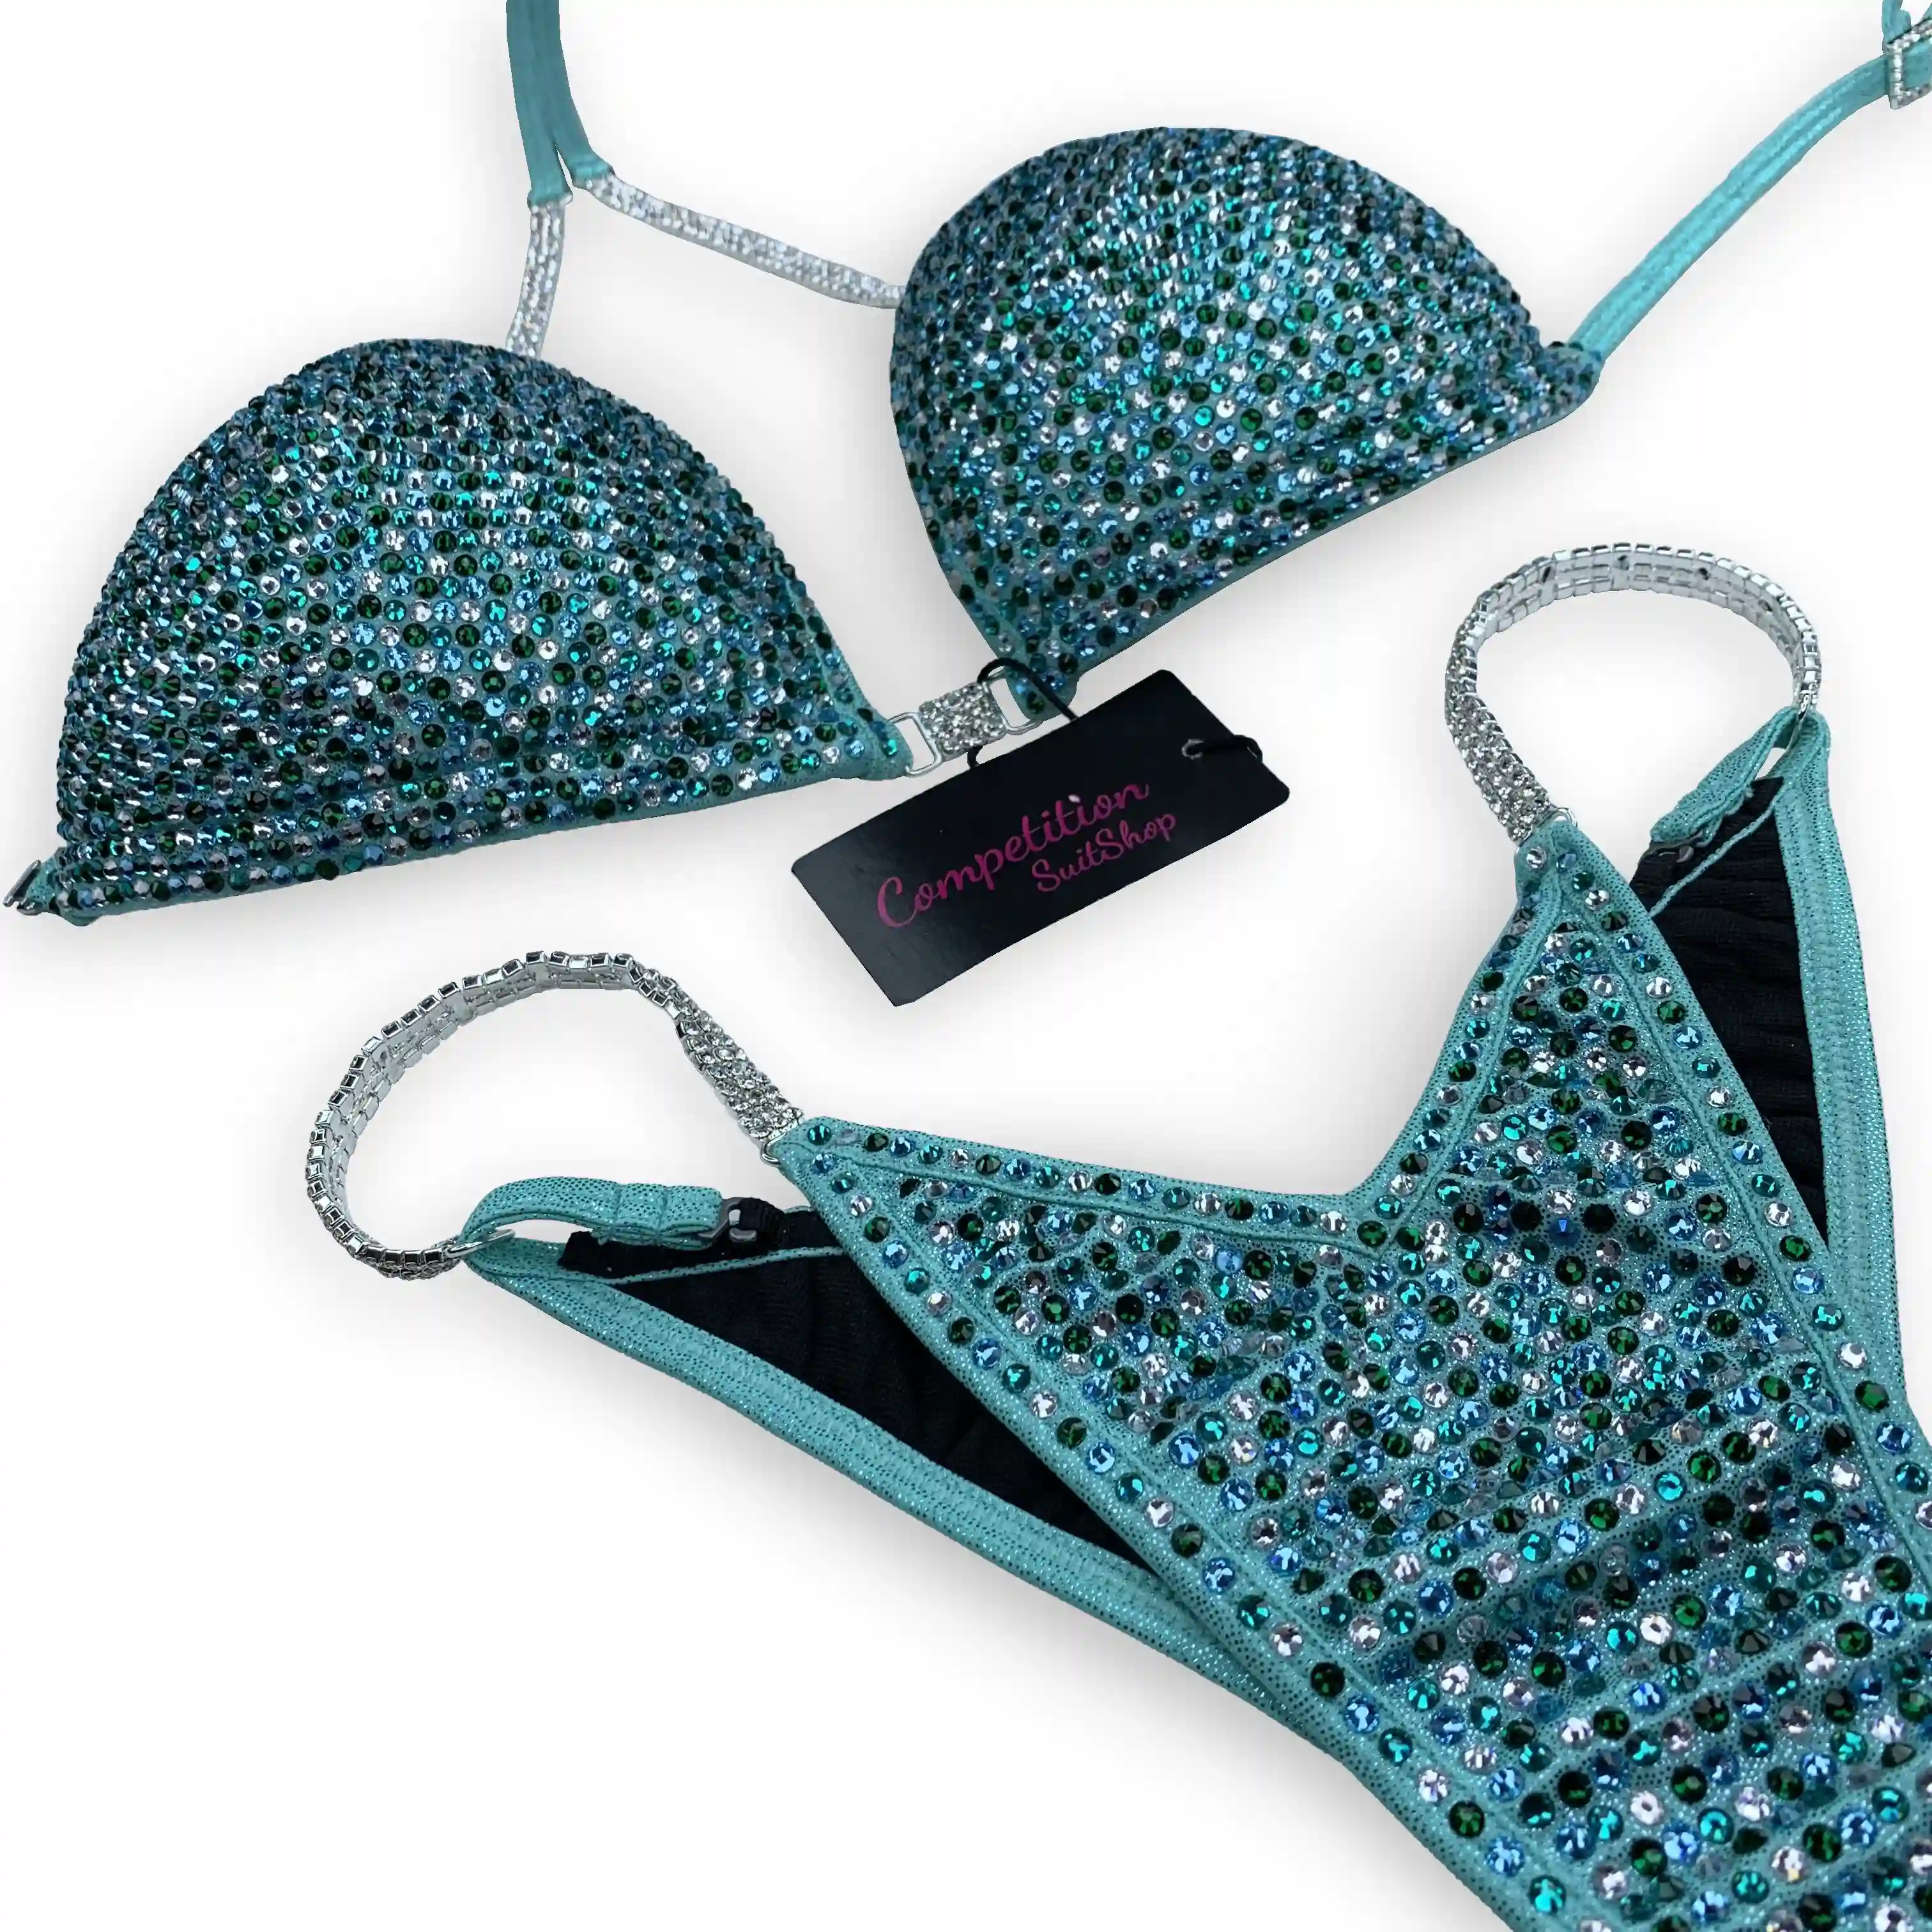 Aqua Scatter With Teal & Green Highlights Bikini Competition Suit B193